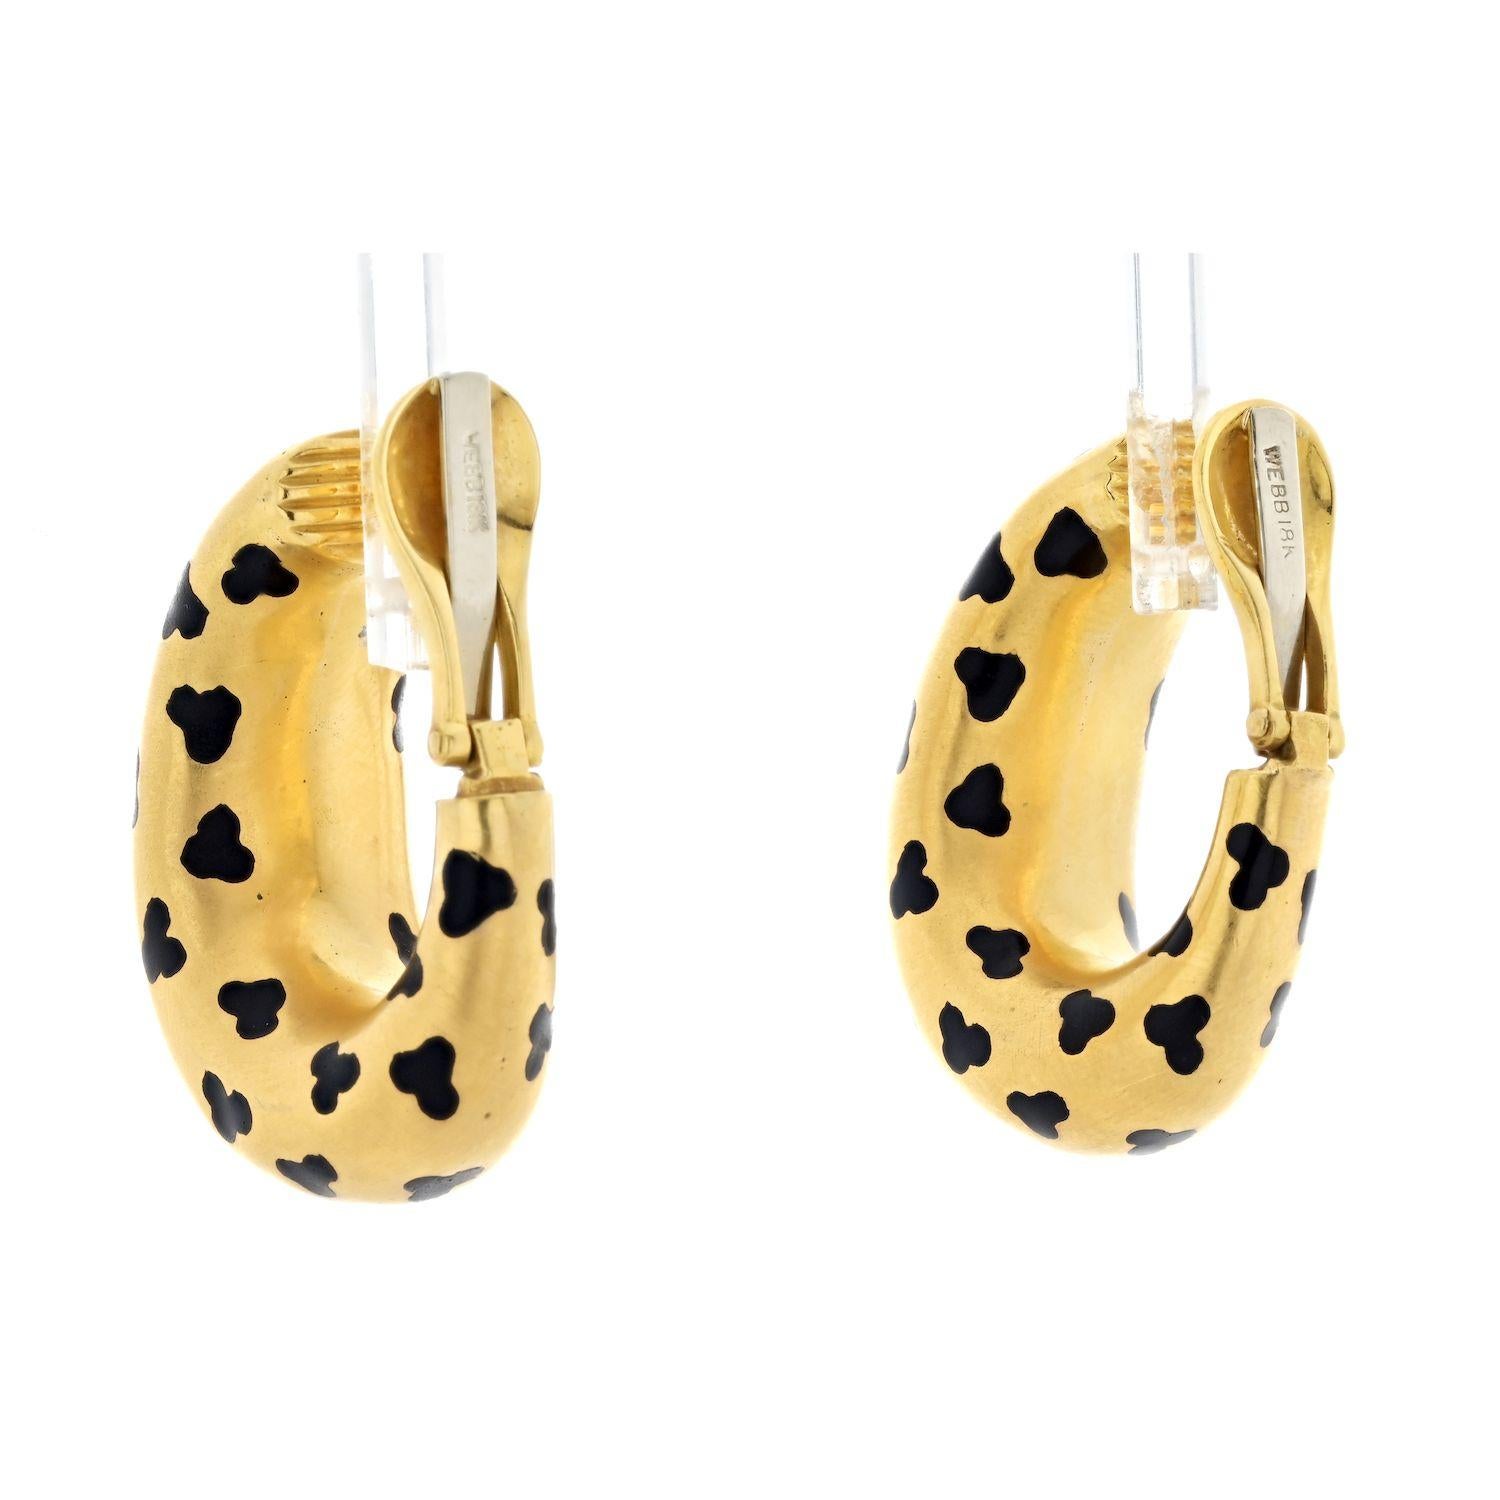 David Webb Platinum & 18K Yellow Gold Leopard Spotted Hoop Earrings.
David Webb oval-shaped hoop earrings in matte polished 18k yellow gold. Tapered, curved design measuring 30mm in length and 10-12mm in width. Clip-style backs. 
